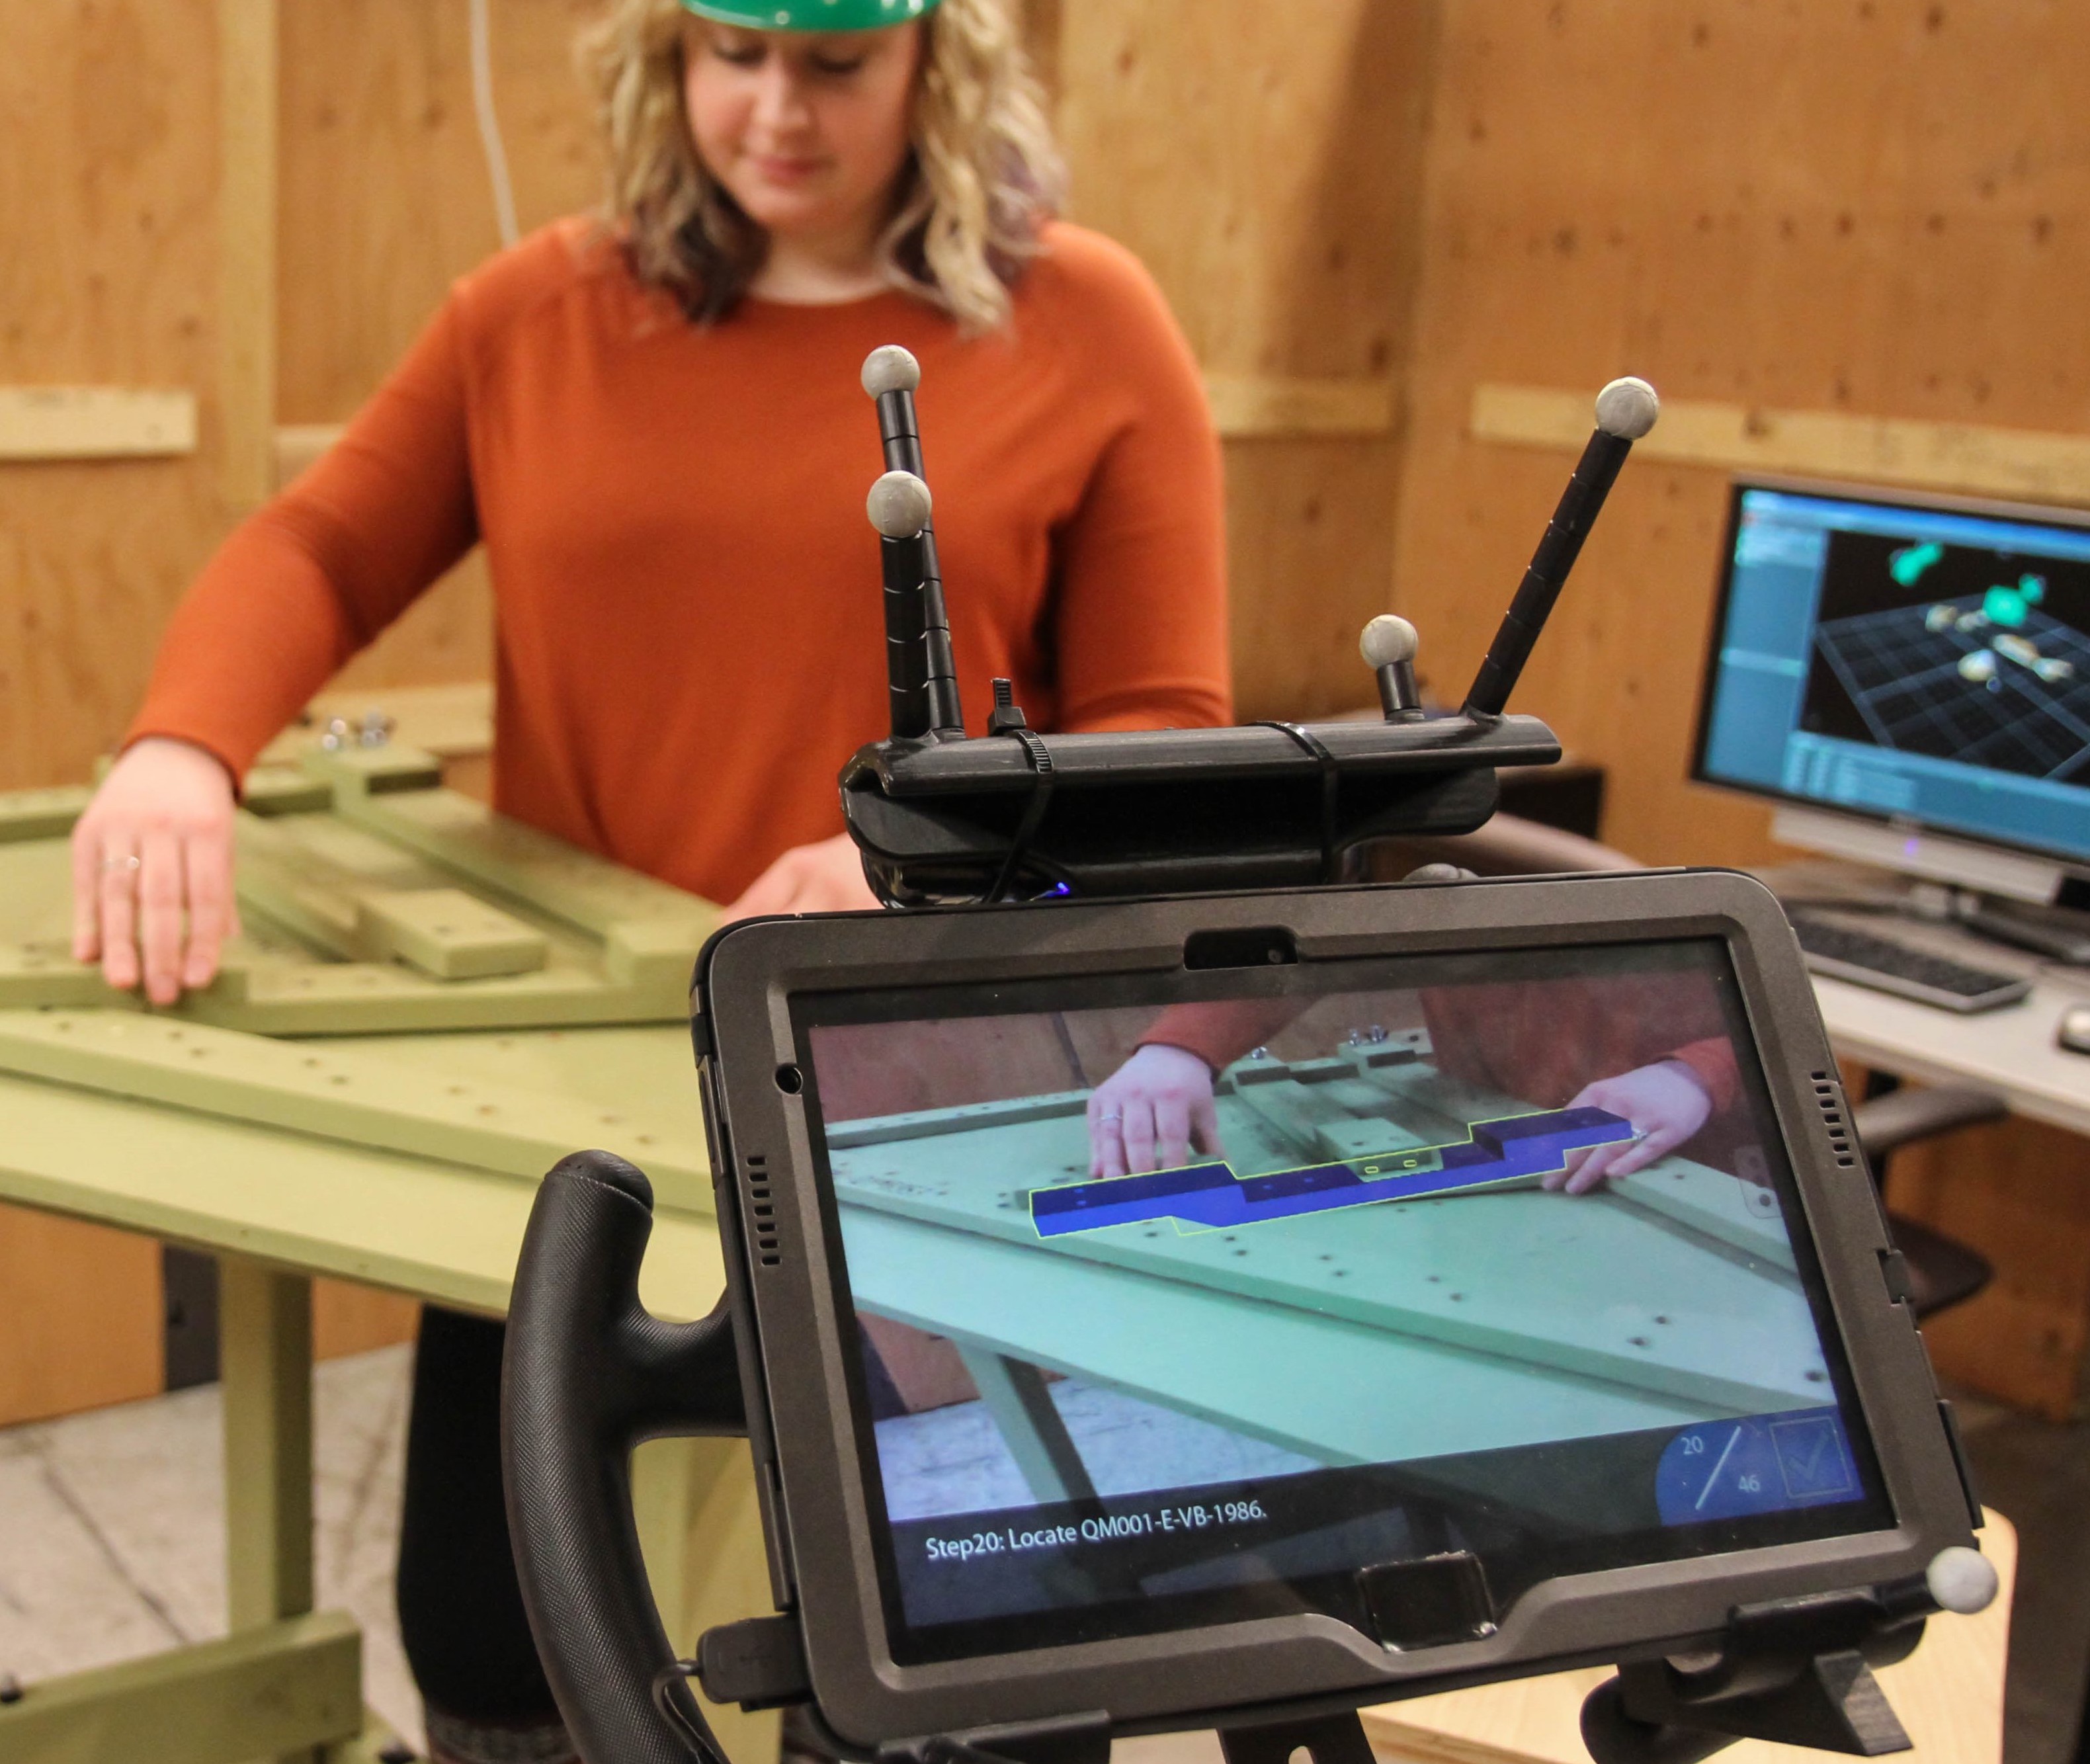 Woman performing assembly task using AR tablet.